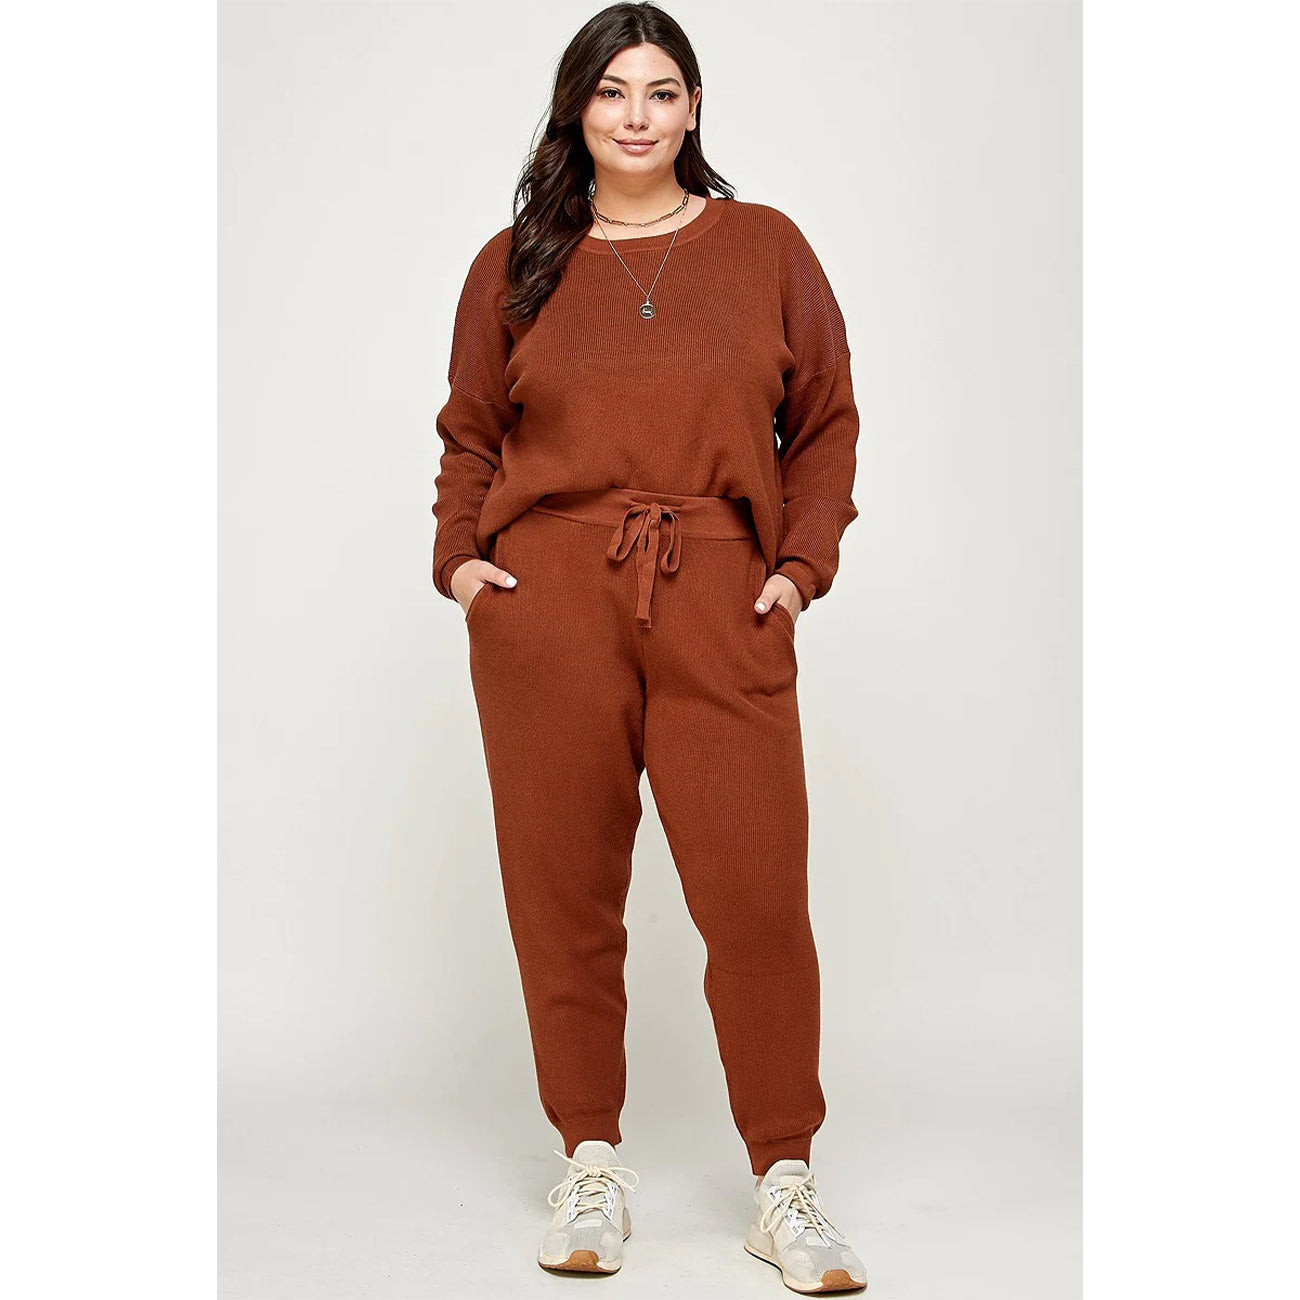 Solid Sweater Knit Women's Top And Pant Set